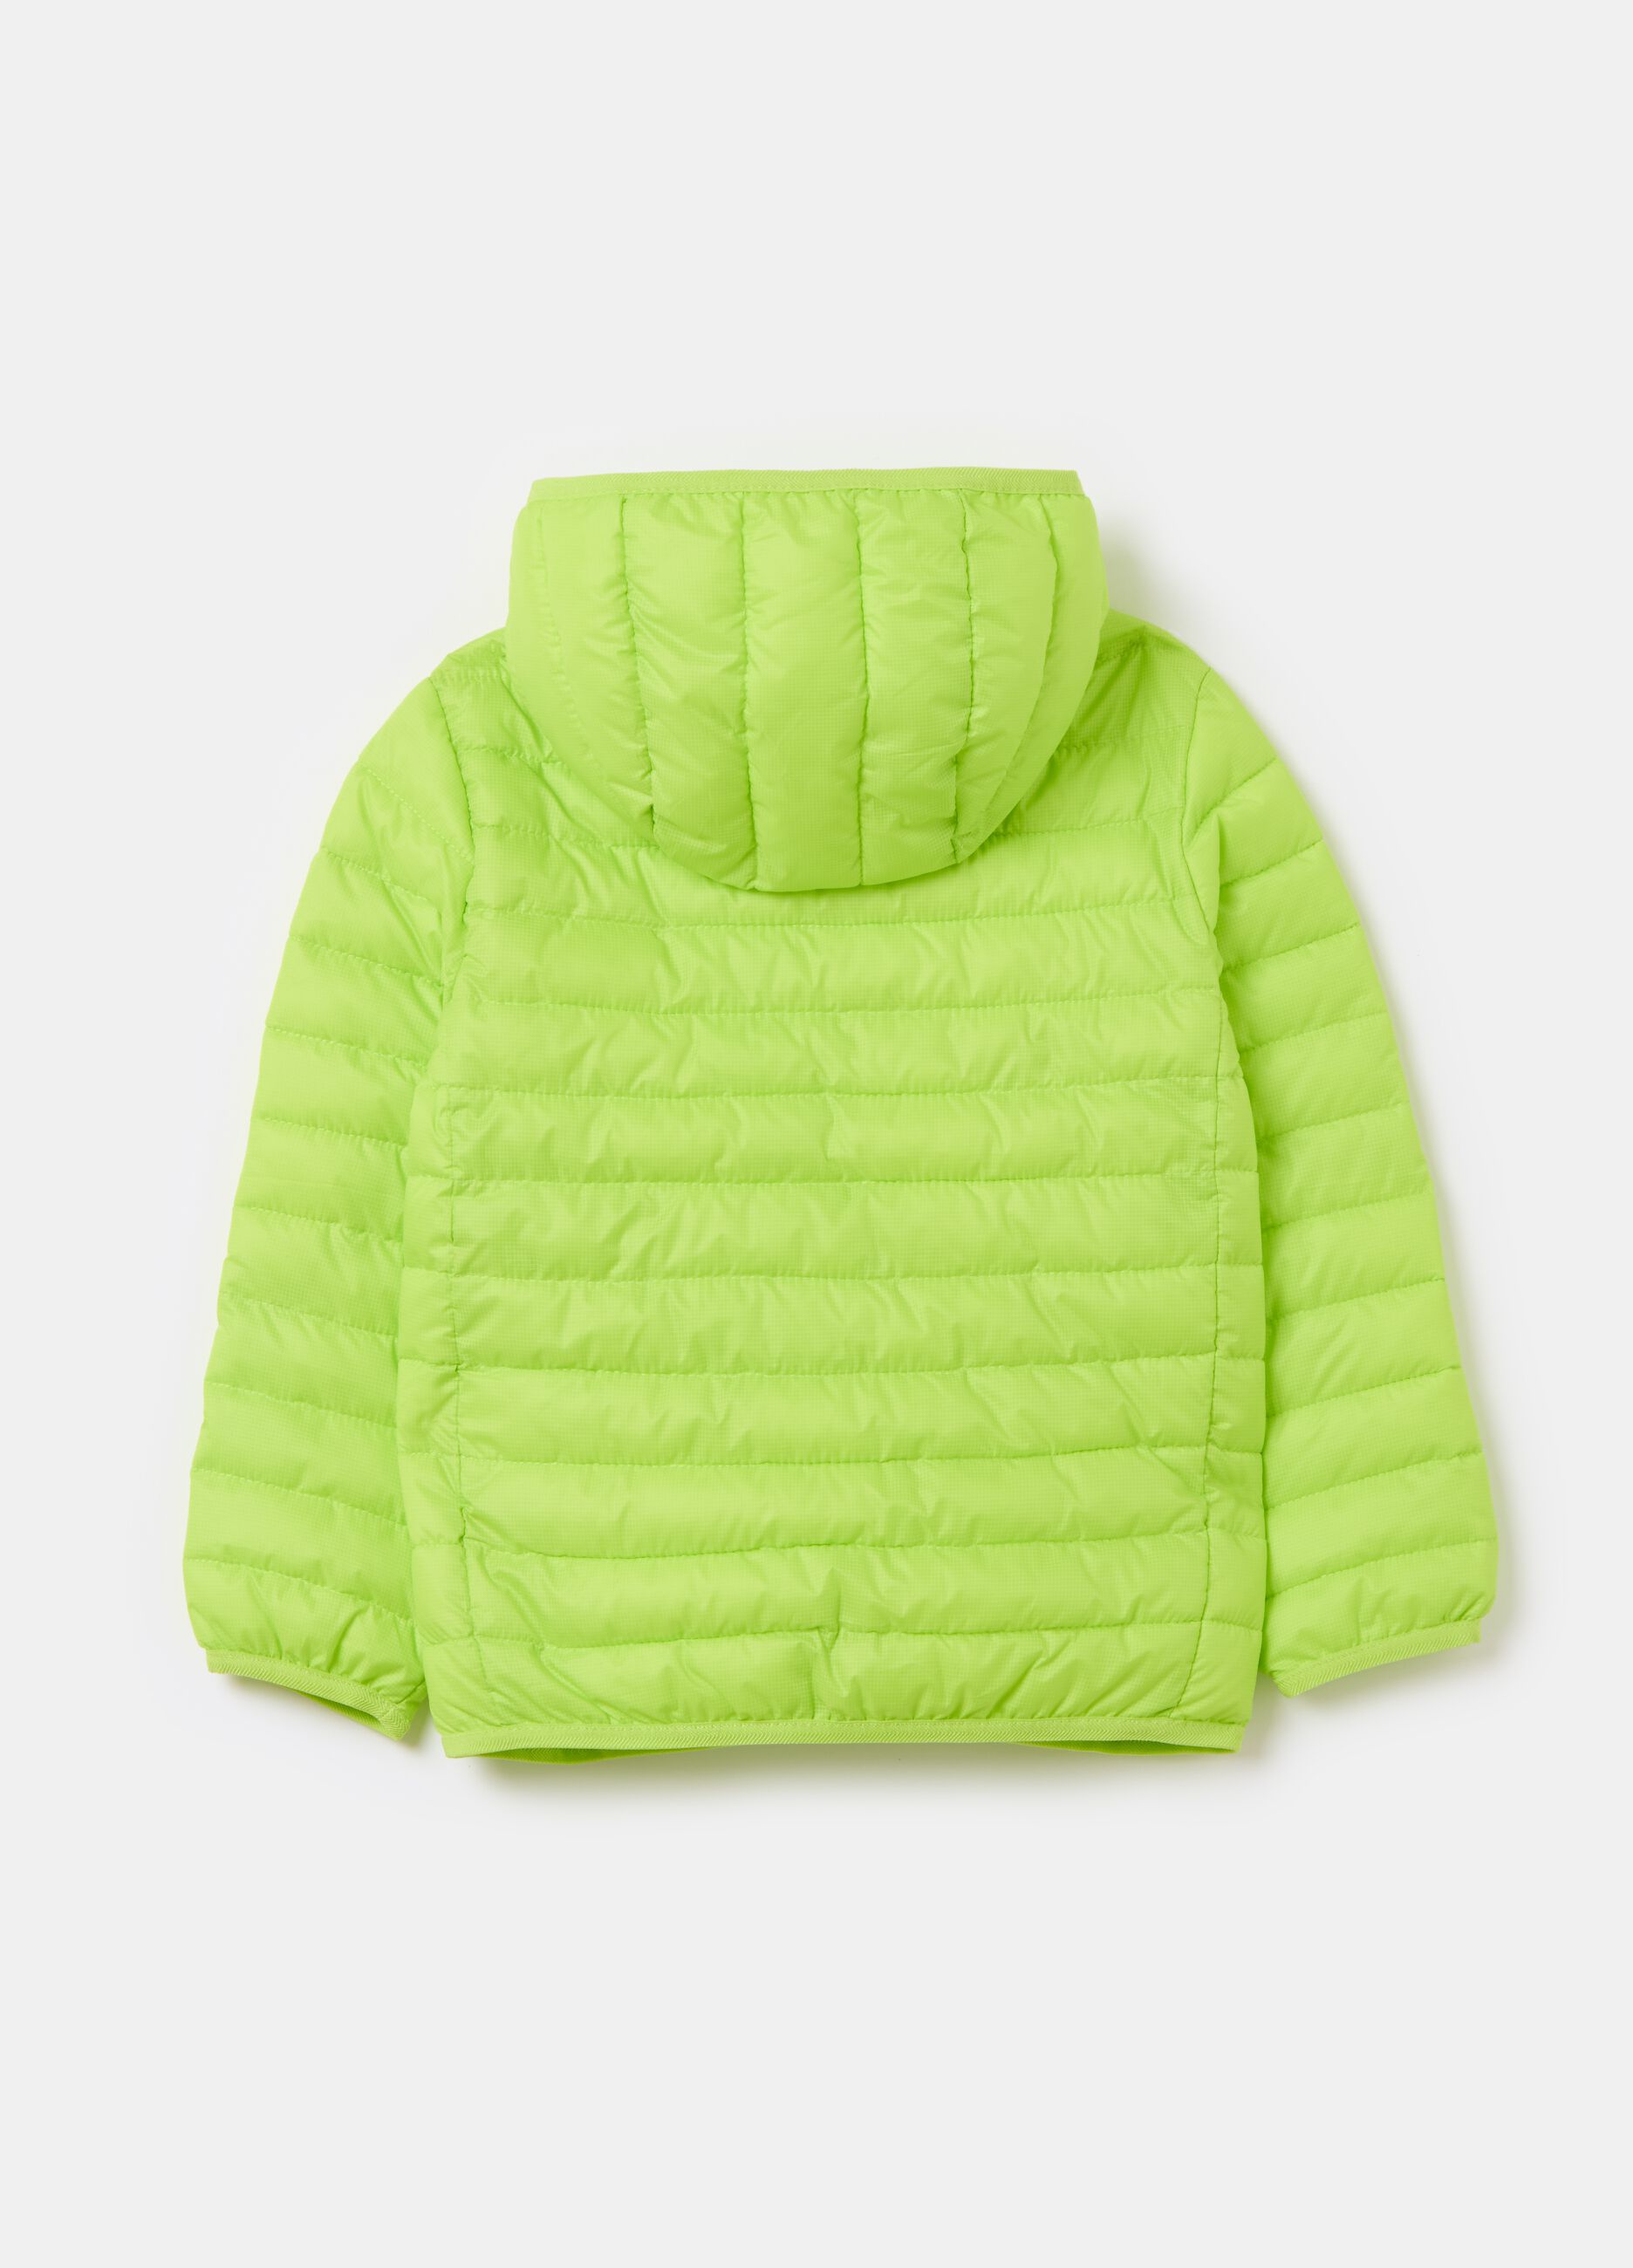 Ultra-light down jacket with hood